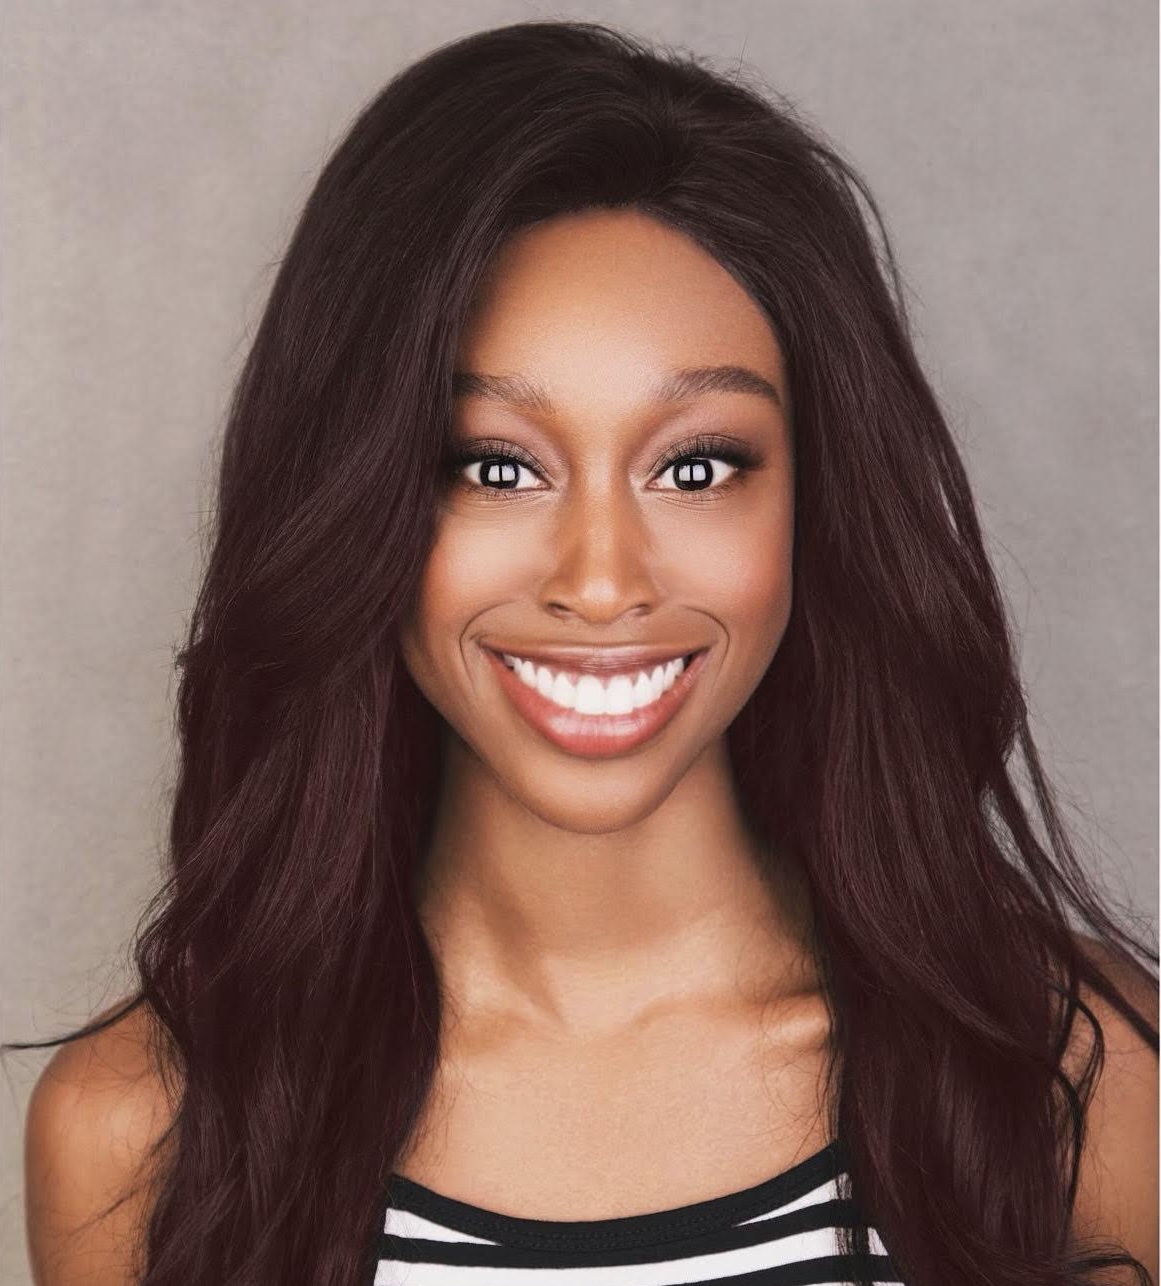 D'Nasya Jordan will play Donna Summer growing up in Boston in the '60s. (Photo Credit: Norwegian Cruise Line)